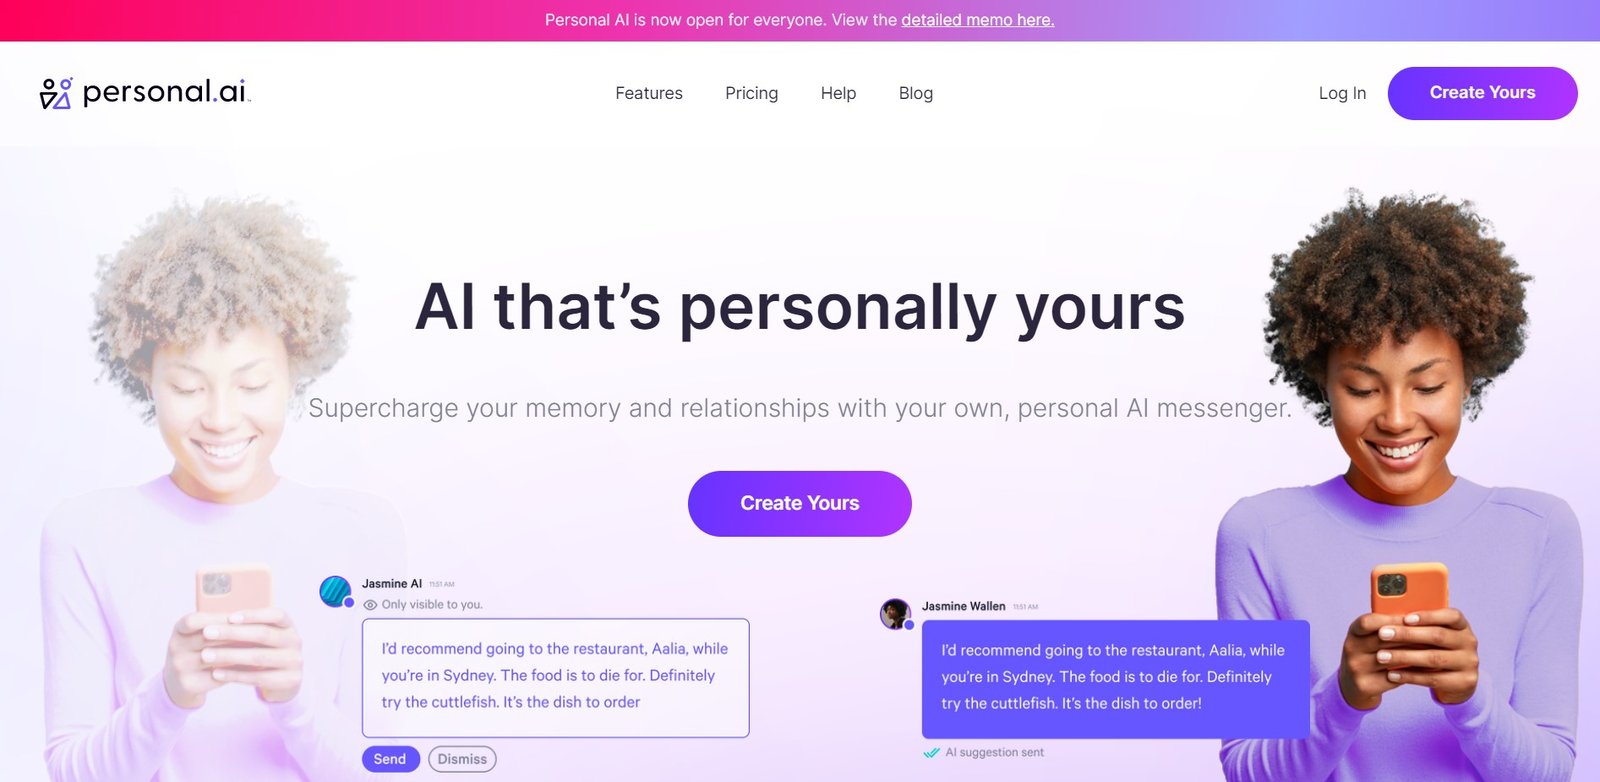 Personal AI provides users with a personalized experience to collaborate